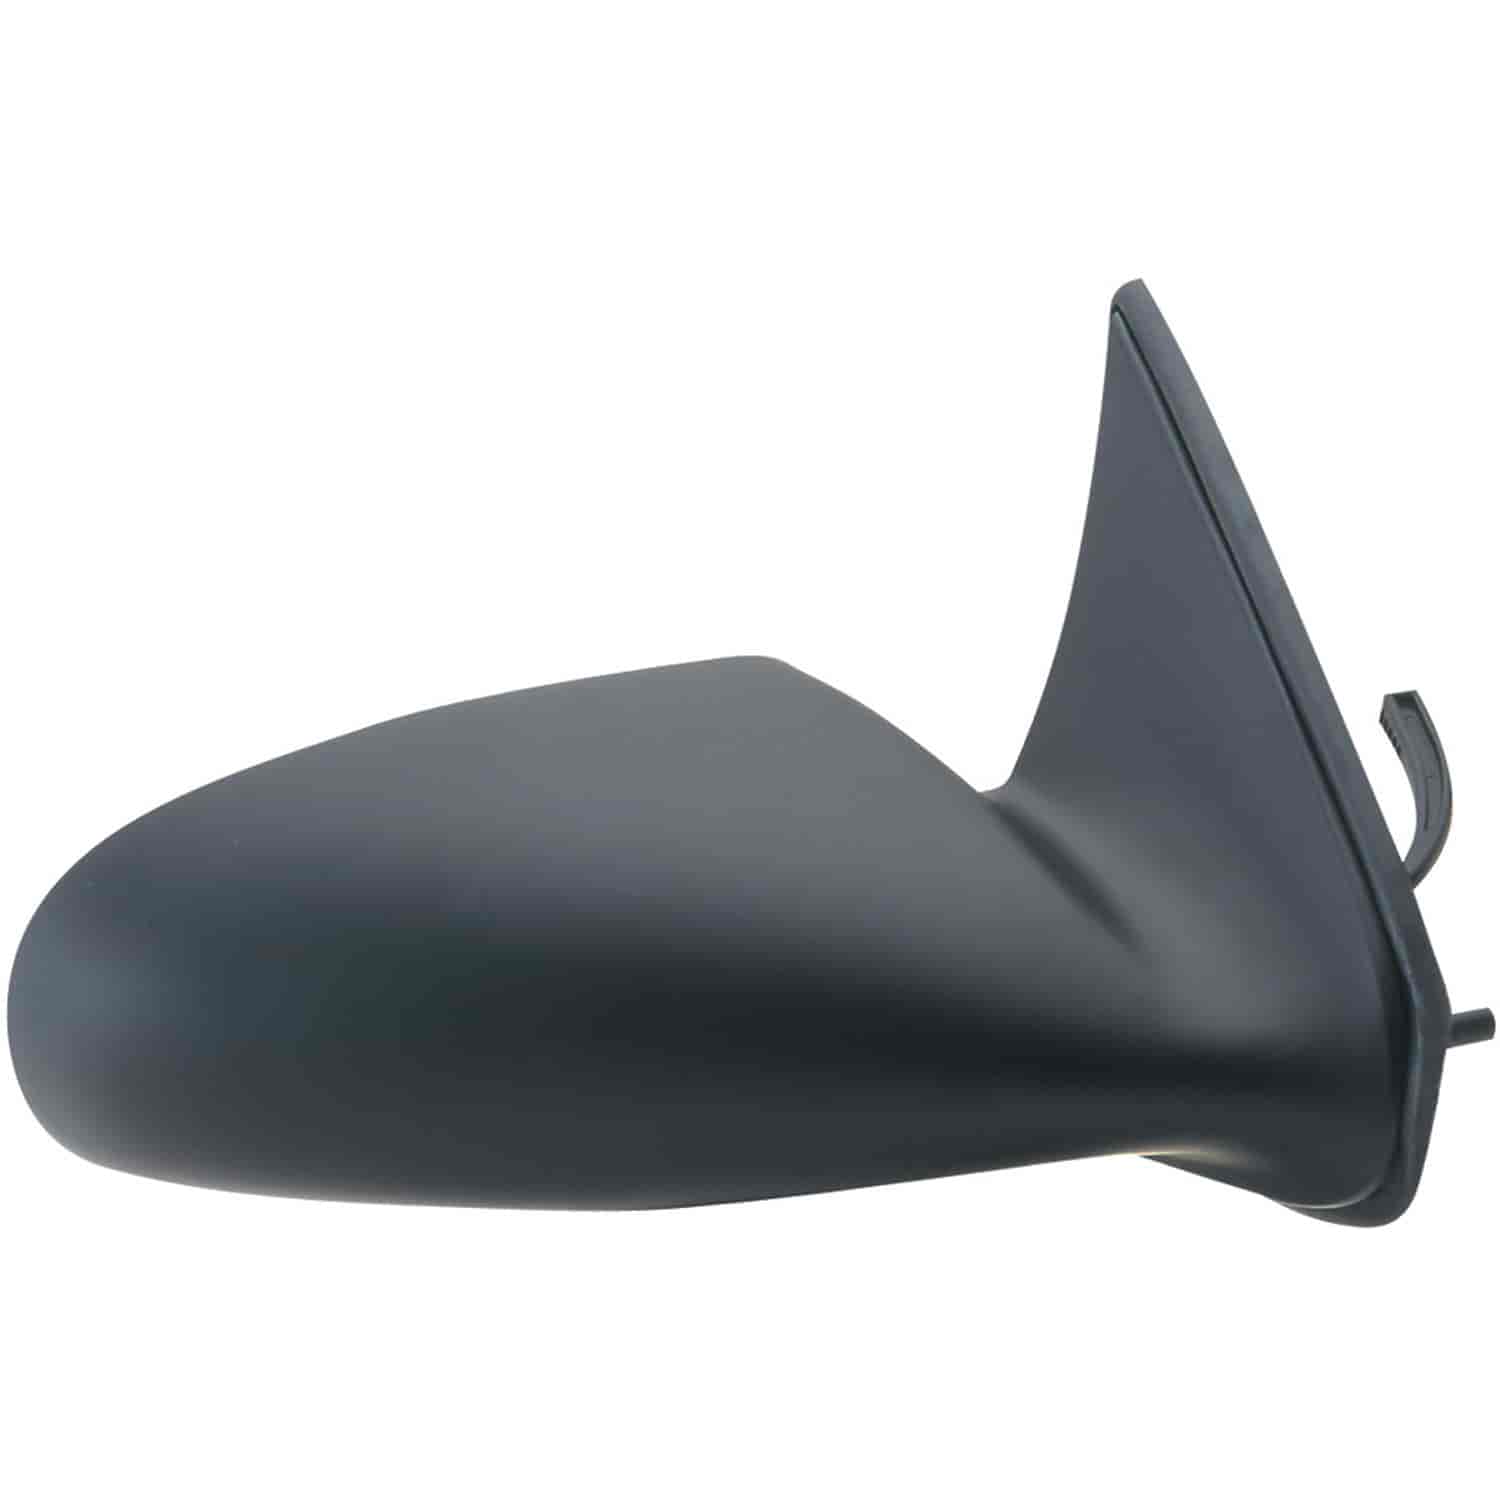 OEM Style Replacement mirror for 89-94 Chevy Sprint GEO Metro passenger side mirror tested to fit an